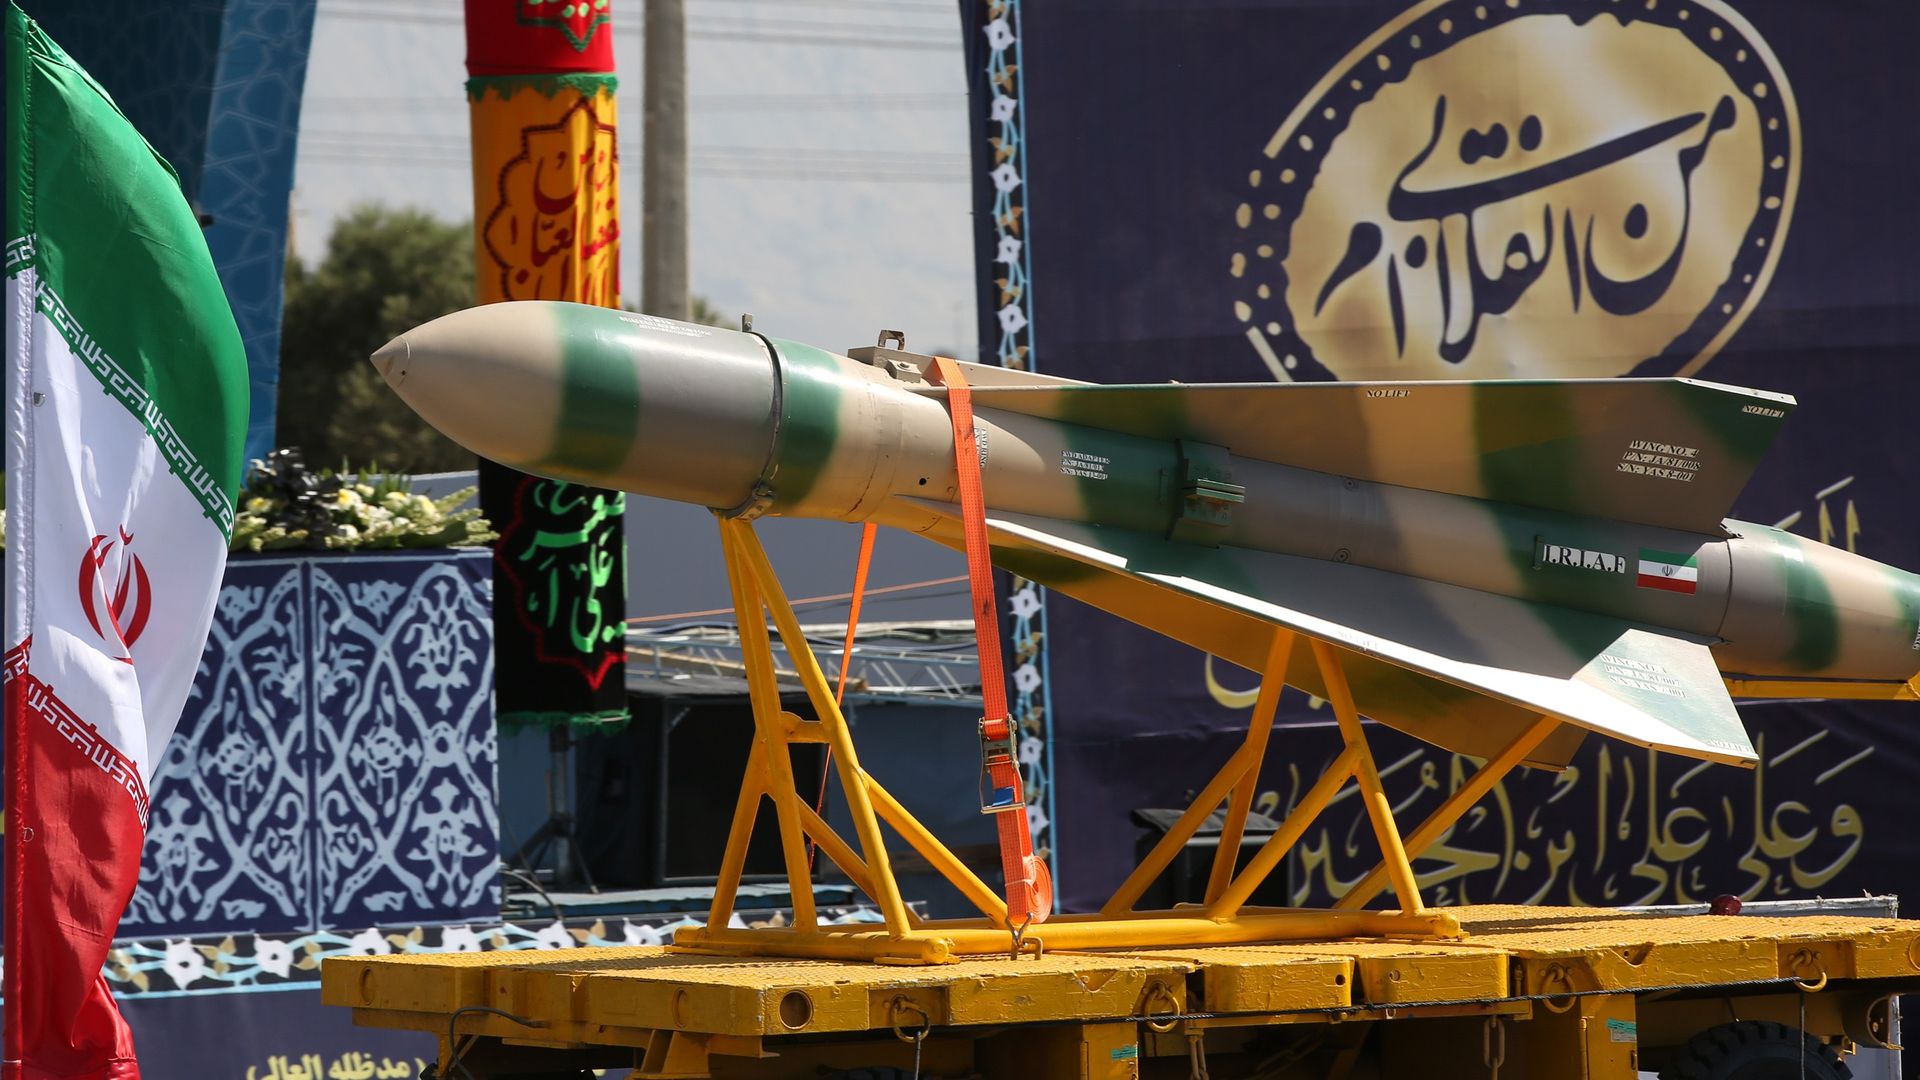 A ballistic missile is seen during a military parade in Tehran, Iran on September 22, 2017.